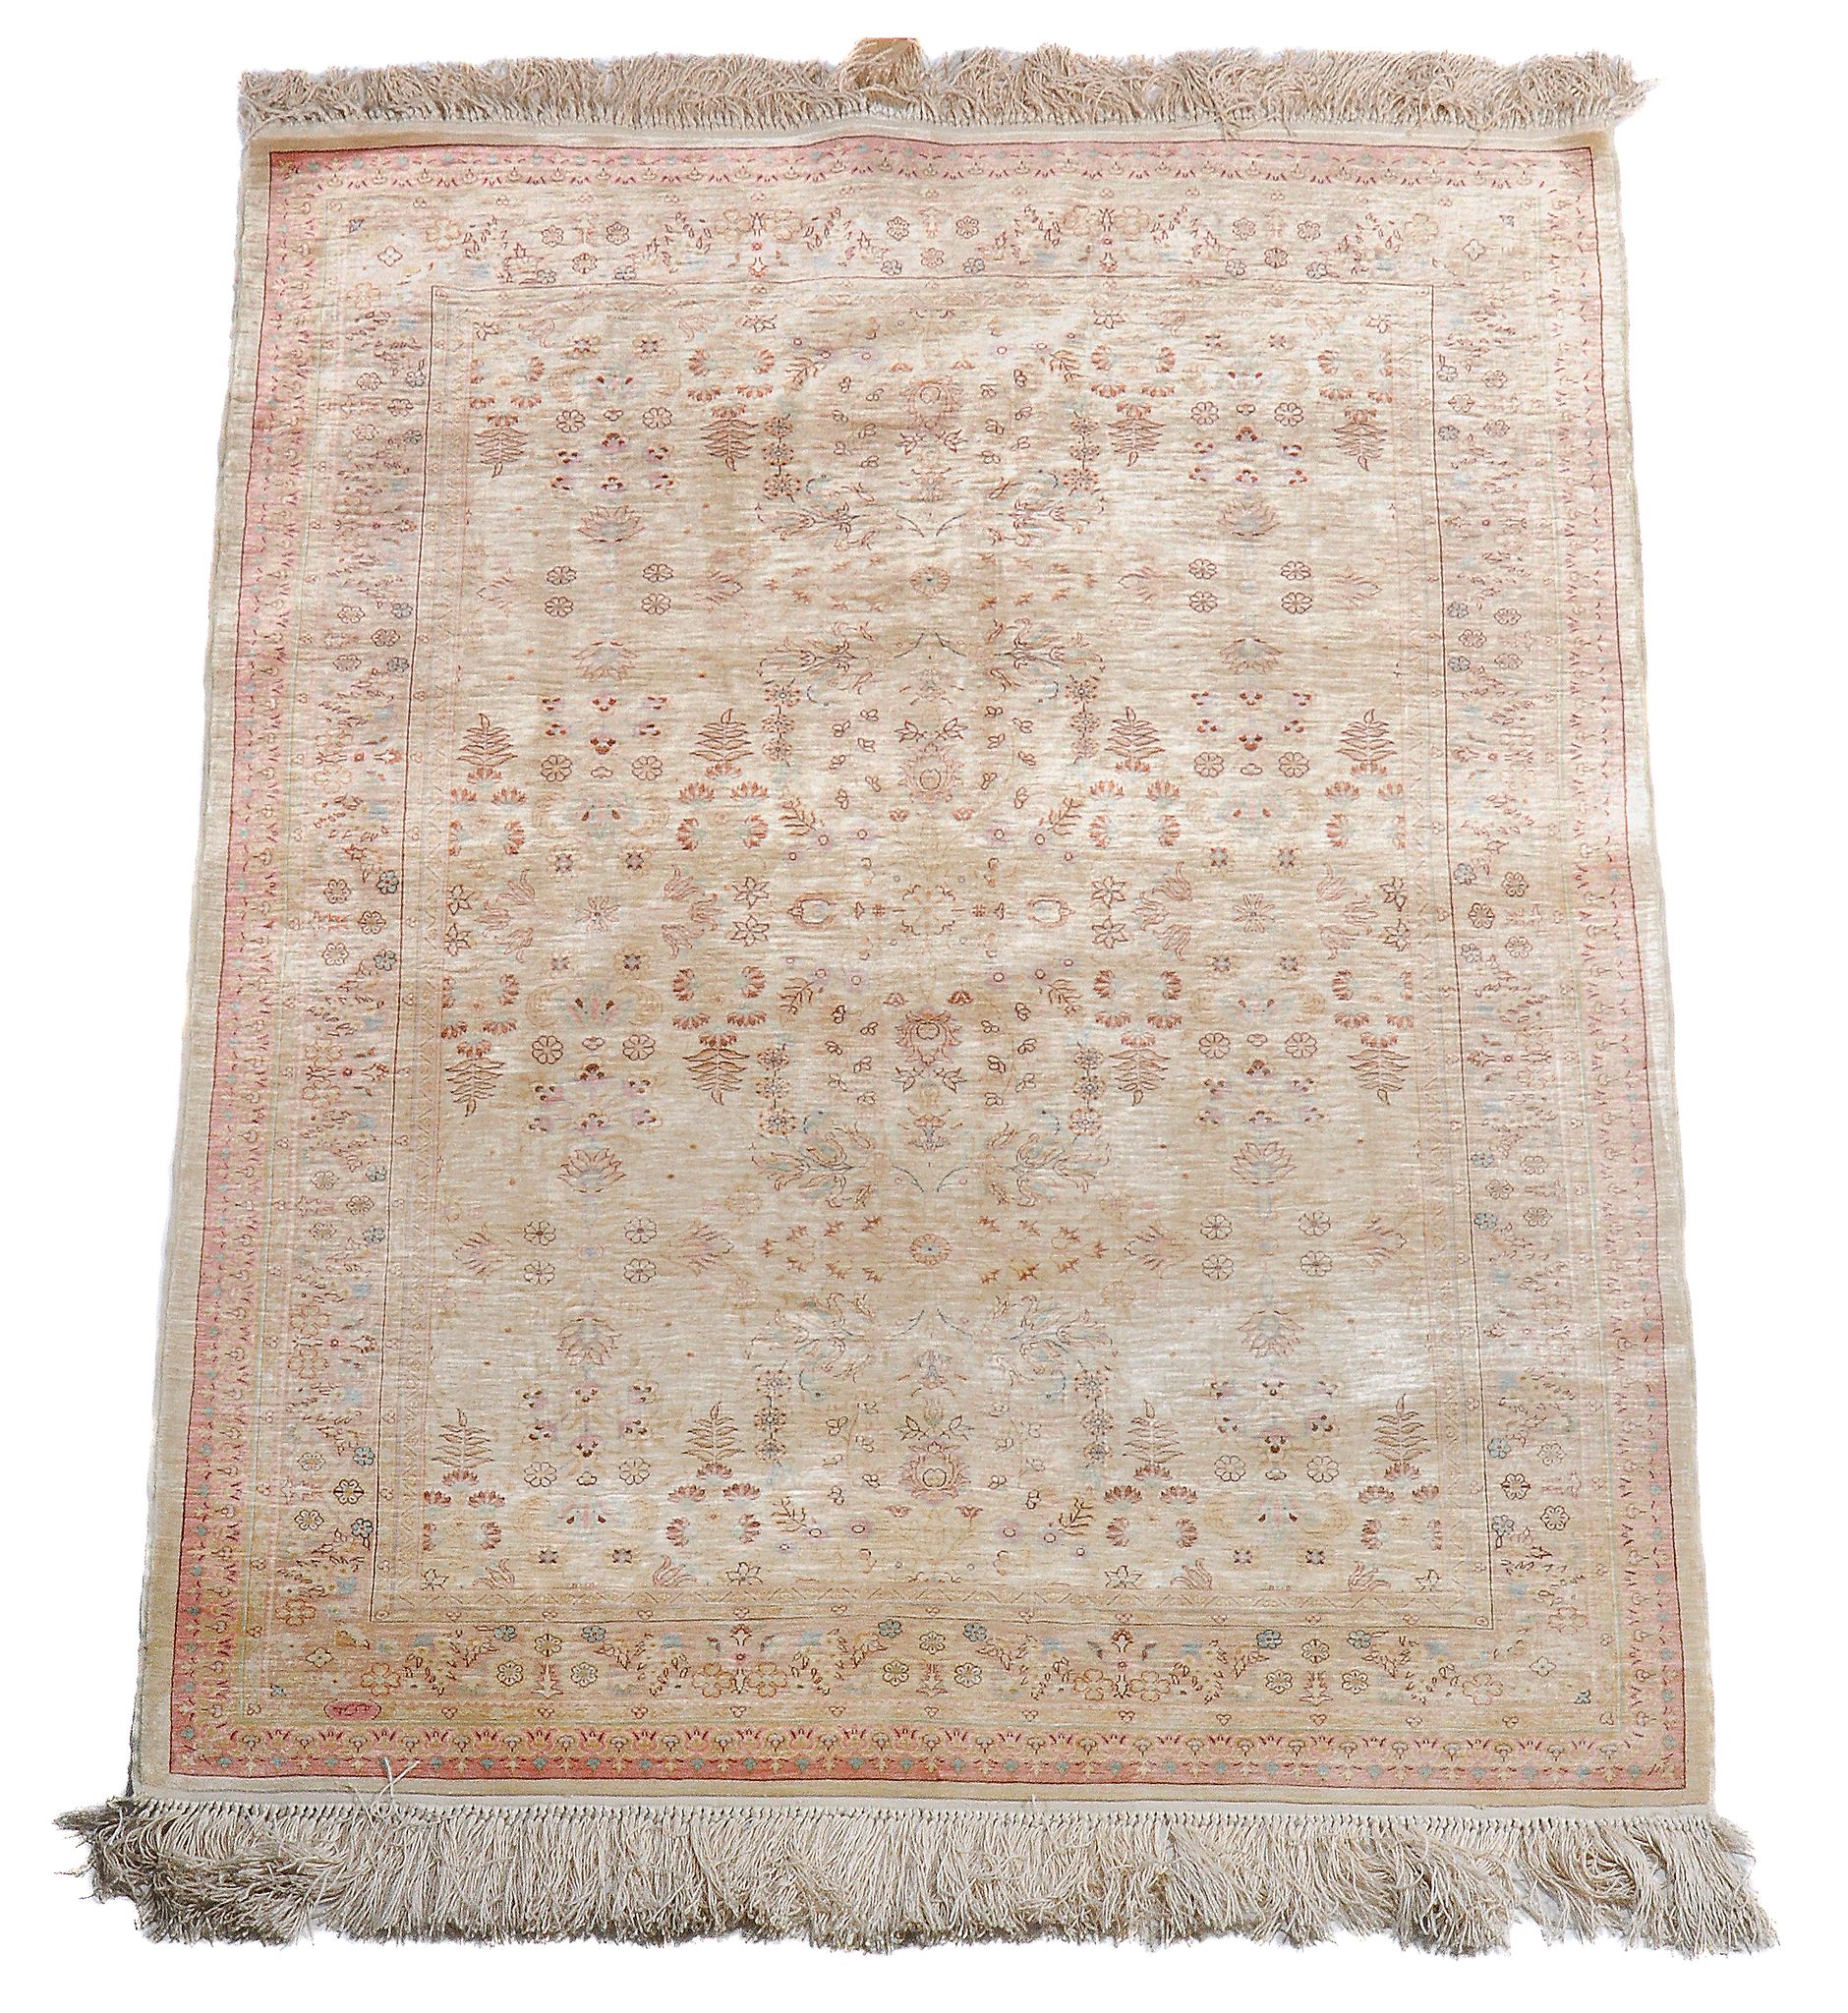 A Hereke silk rug, 20th century
Please note: the size is 155 x 109cm